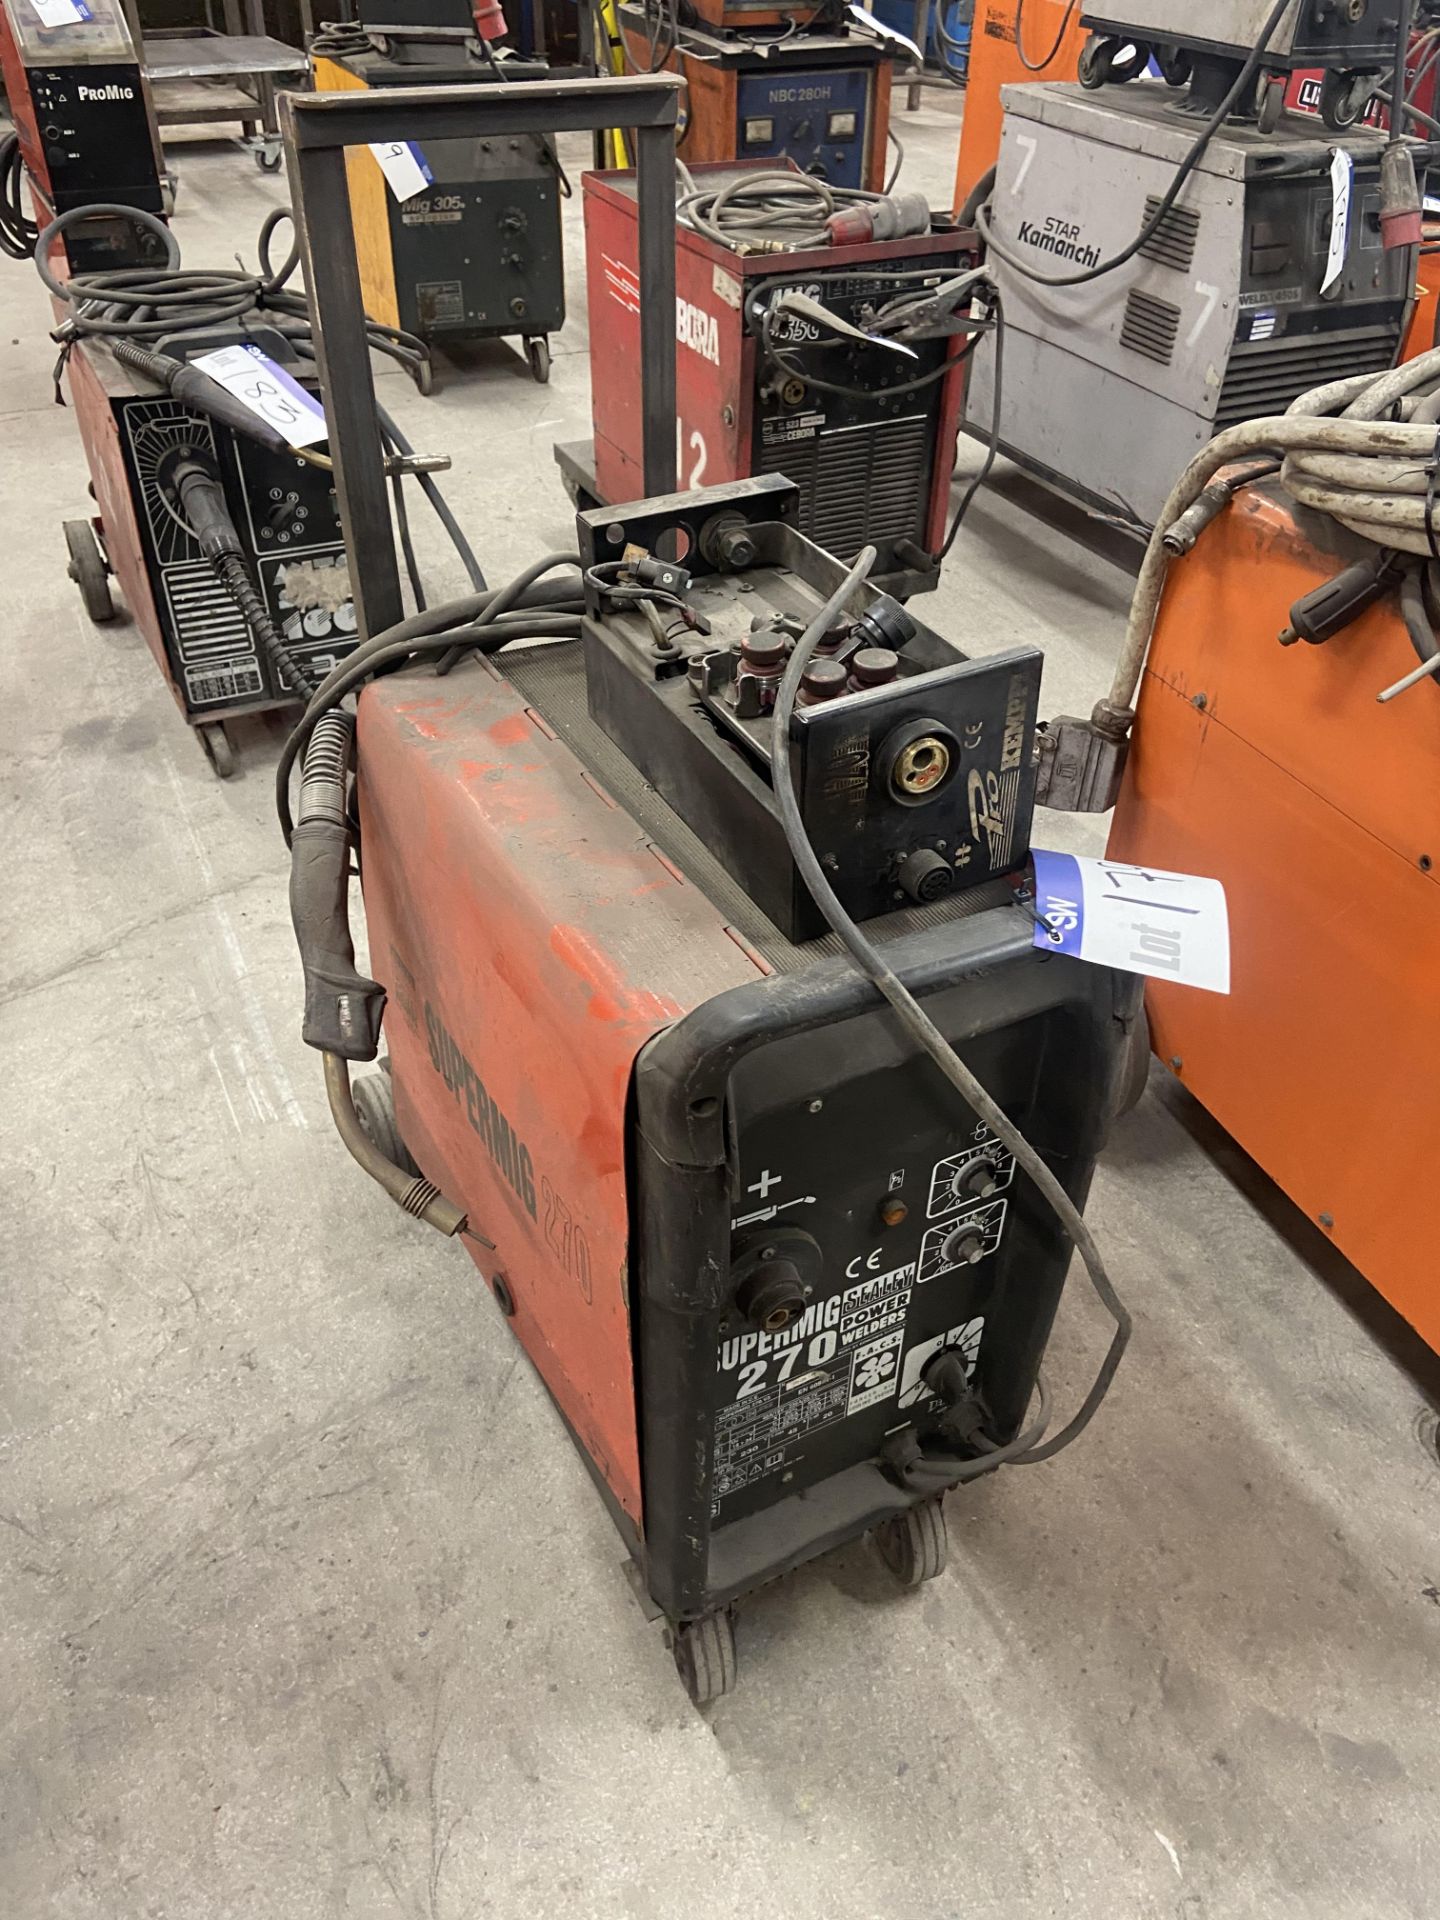 Sealey Supermig 270 Welding Equipment (may require attention) Please read the following important